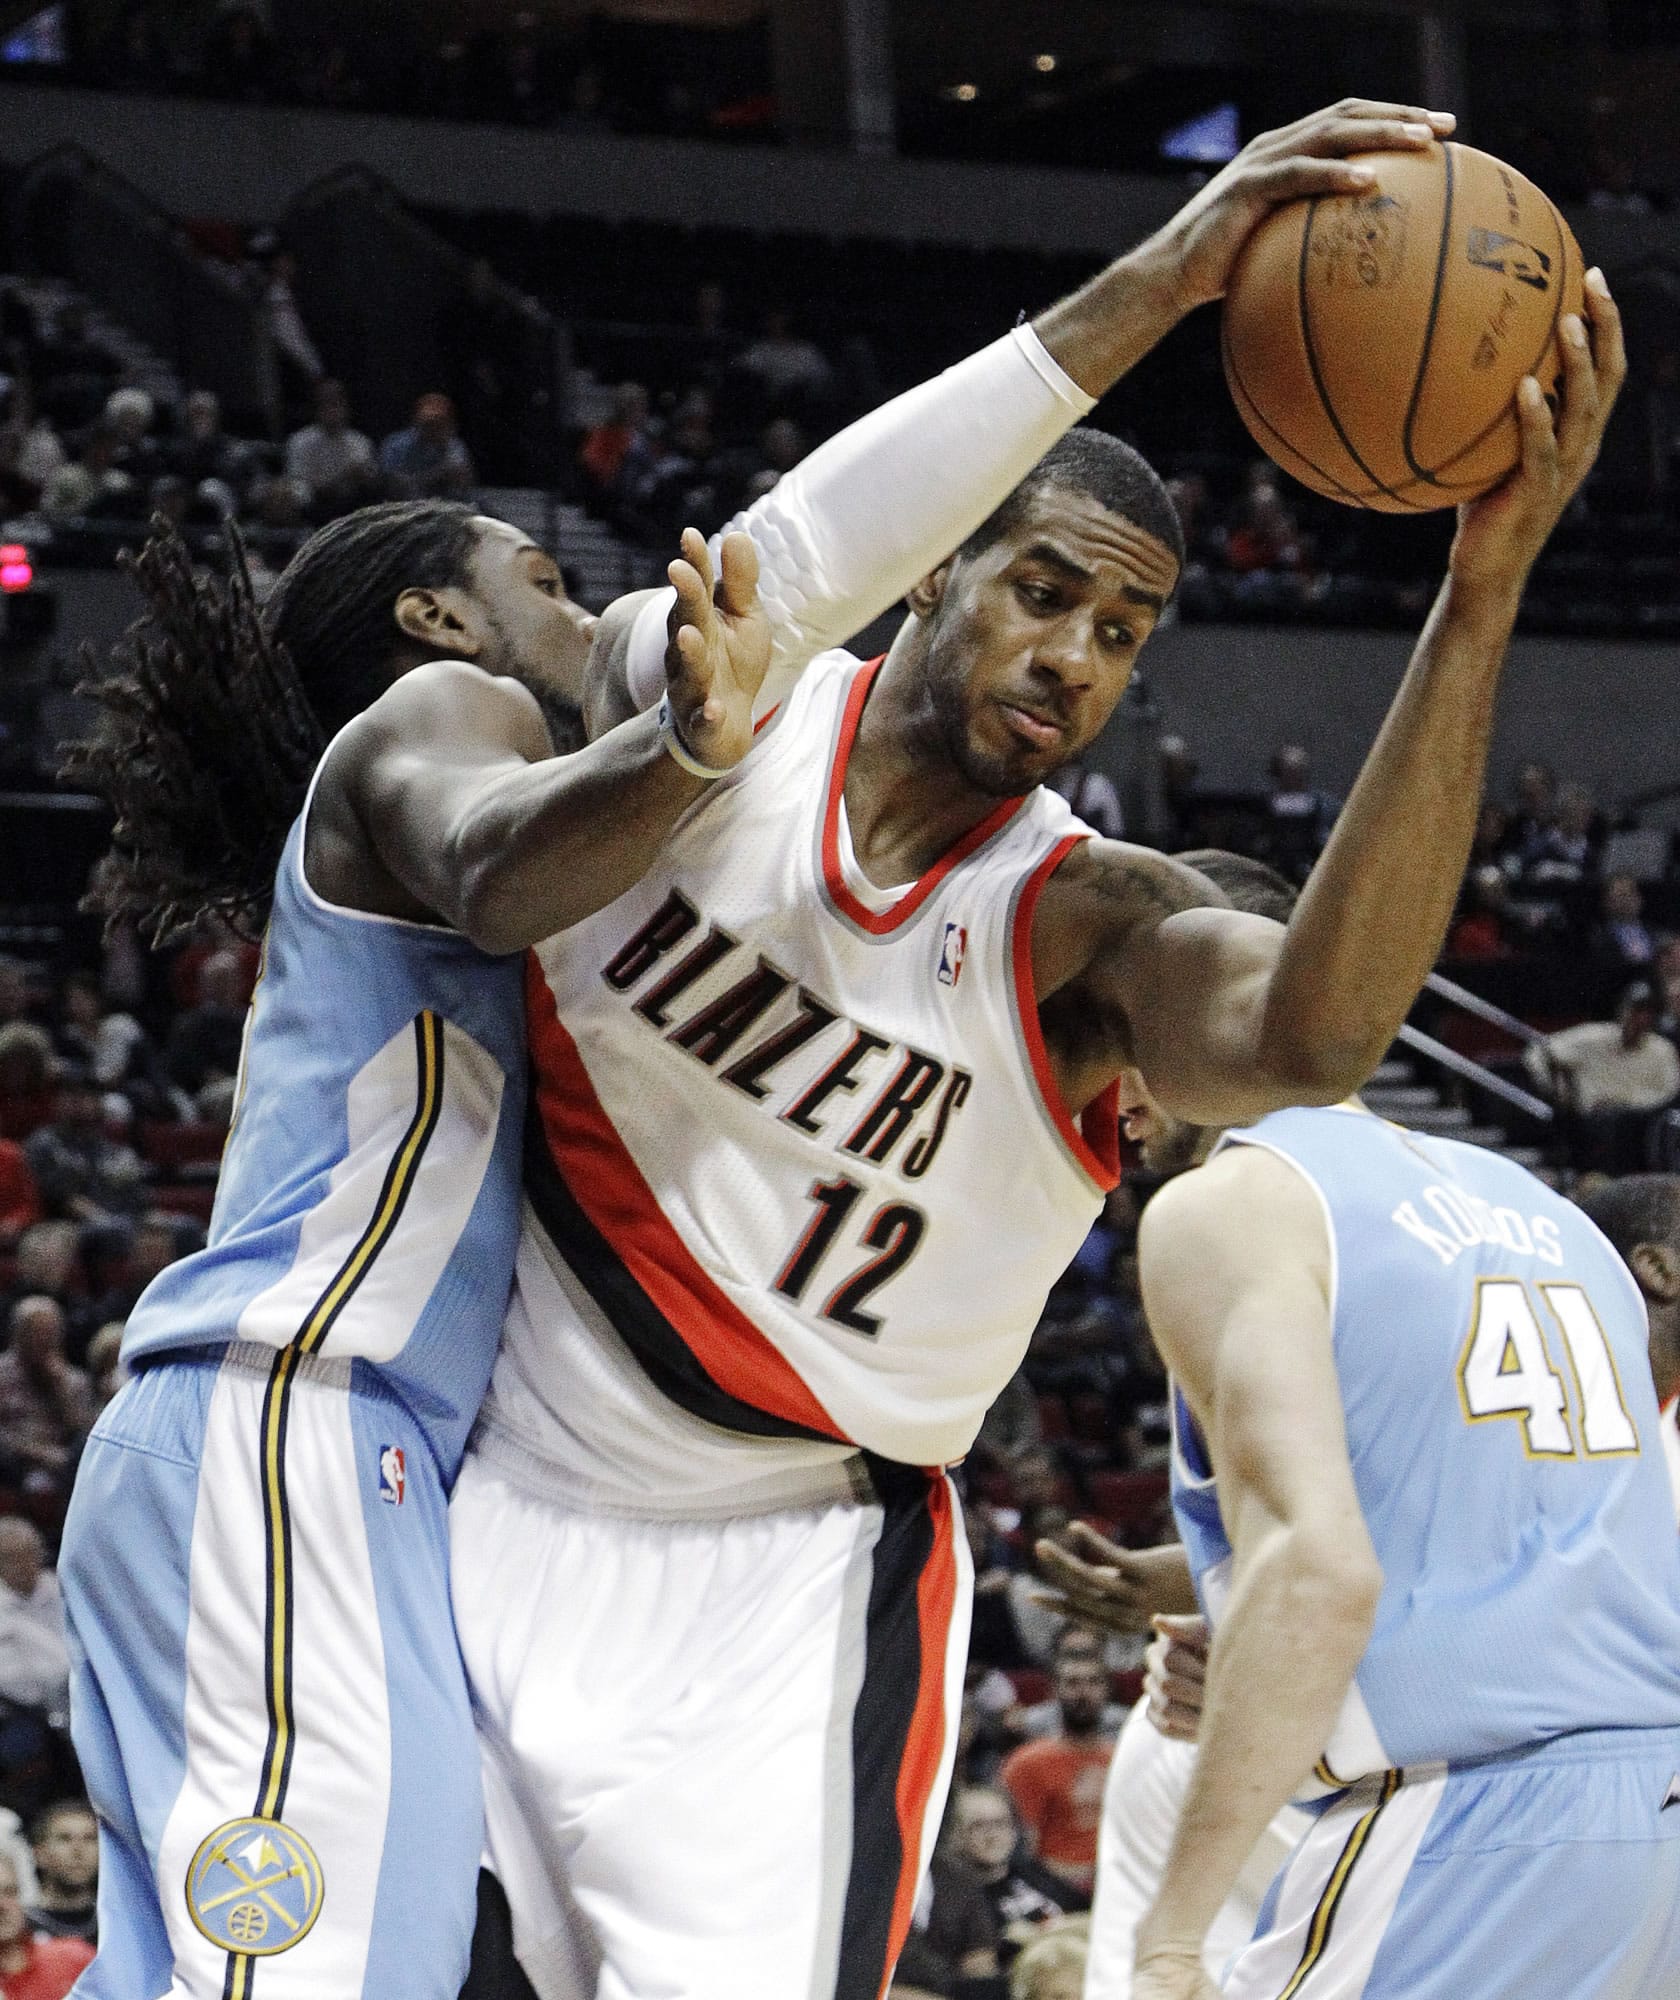 Portland Trail Blazers forward LaMarcus Aldridge (12) pulls in a rebound against Denver Nuggets forward Kenneth Faried, left, and center Kosta Koufos (41), of Russia, during the first half of their preseason NBA basketball game Wednesday, Oct.